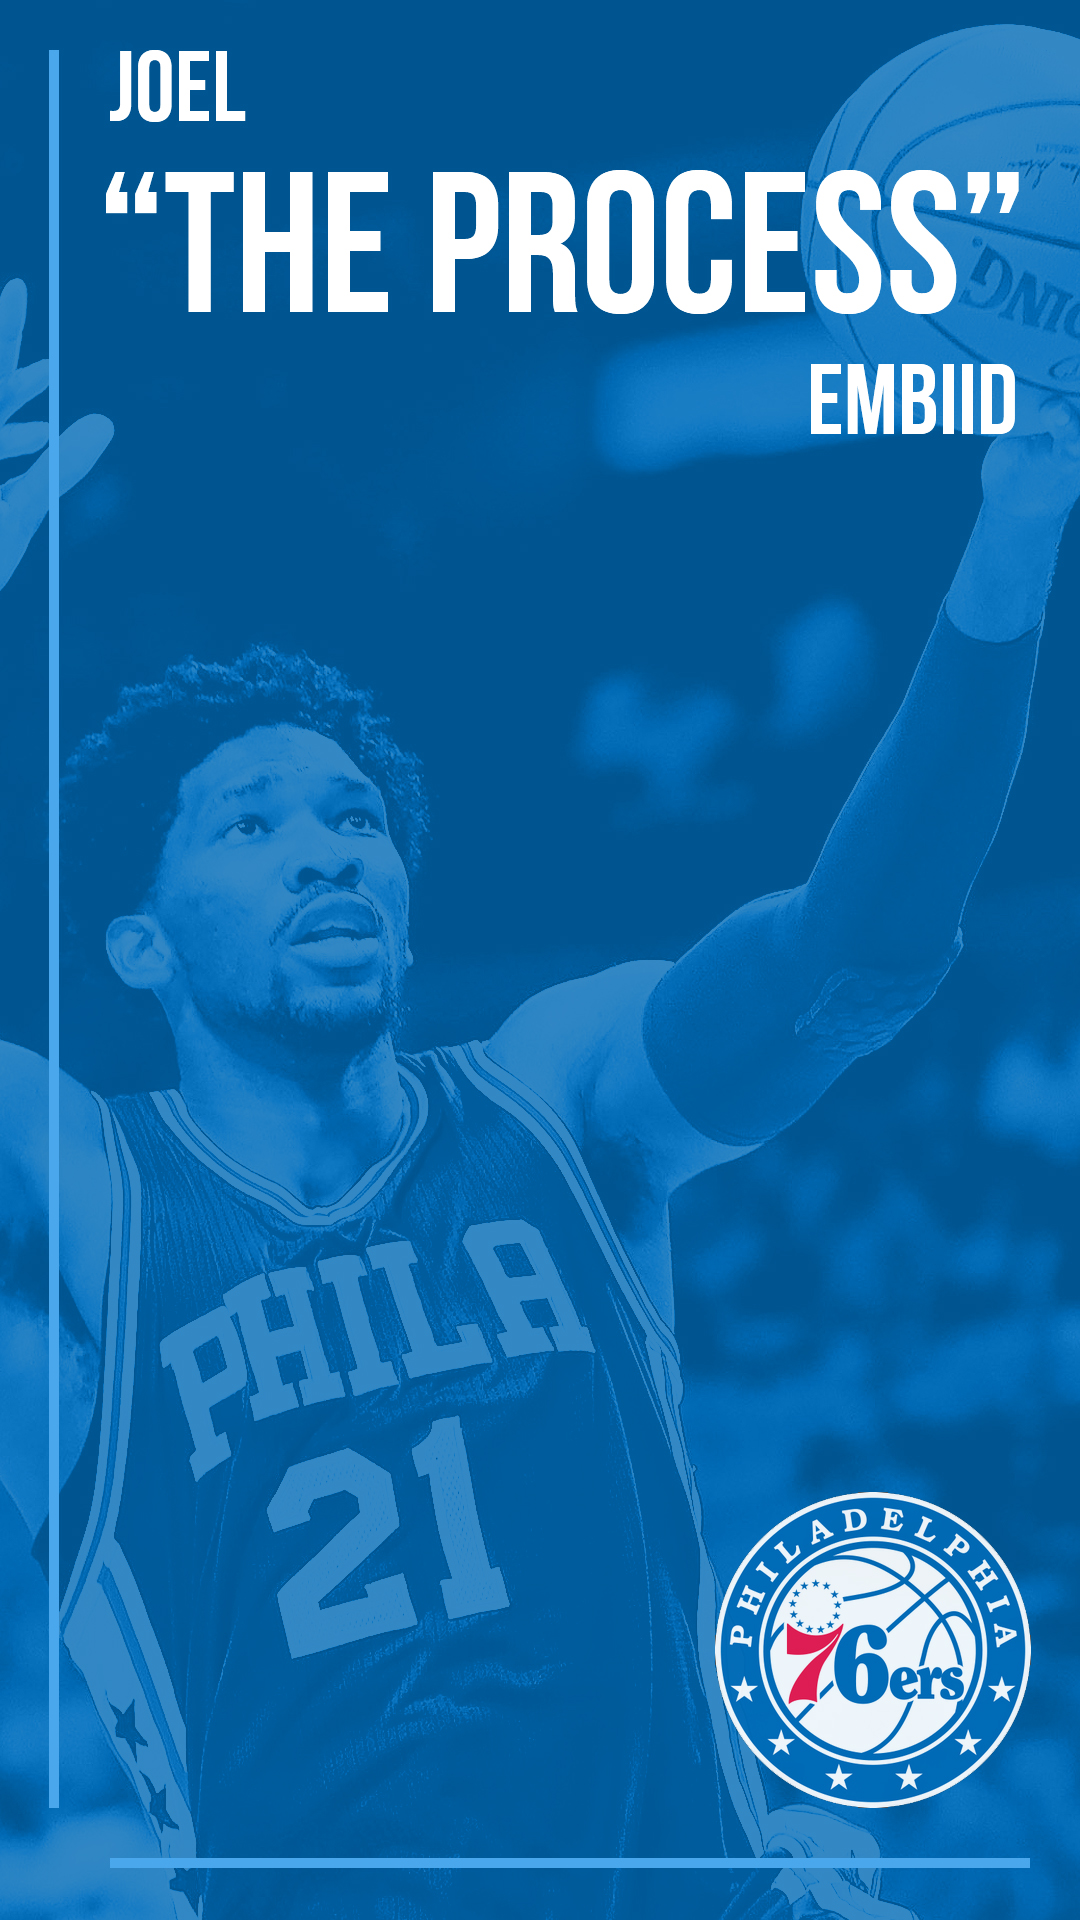 Free Download Joel Embiid Wallpapers Album On Imgur [1080x1920] For Your Desktop Mobile